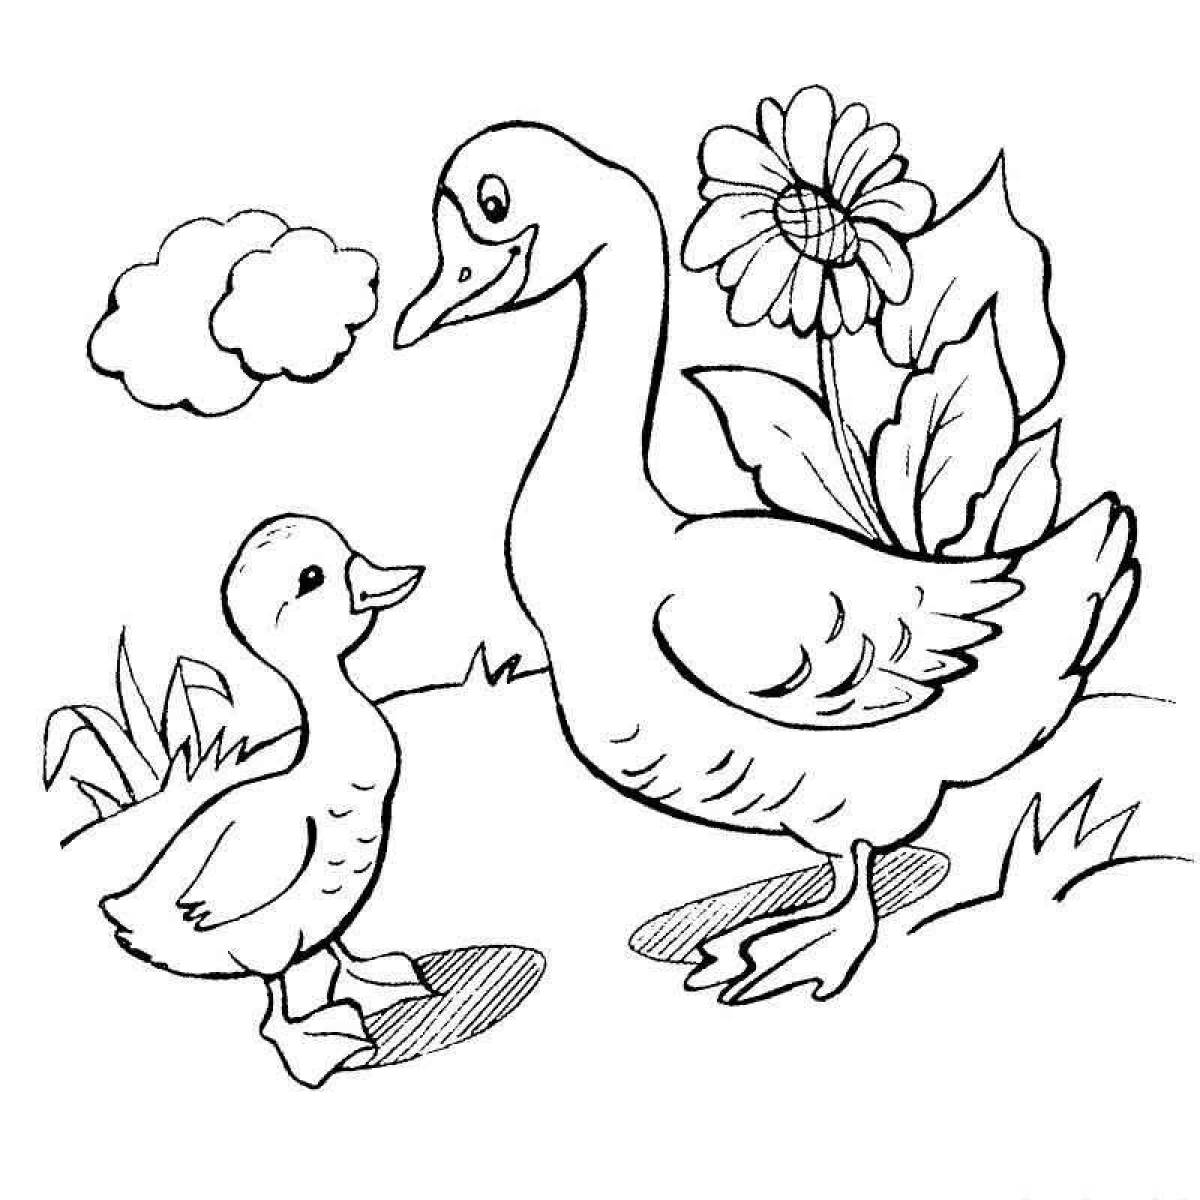 Coloring goose for kids